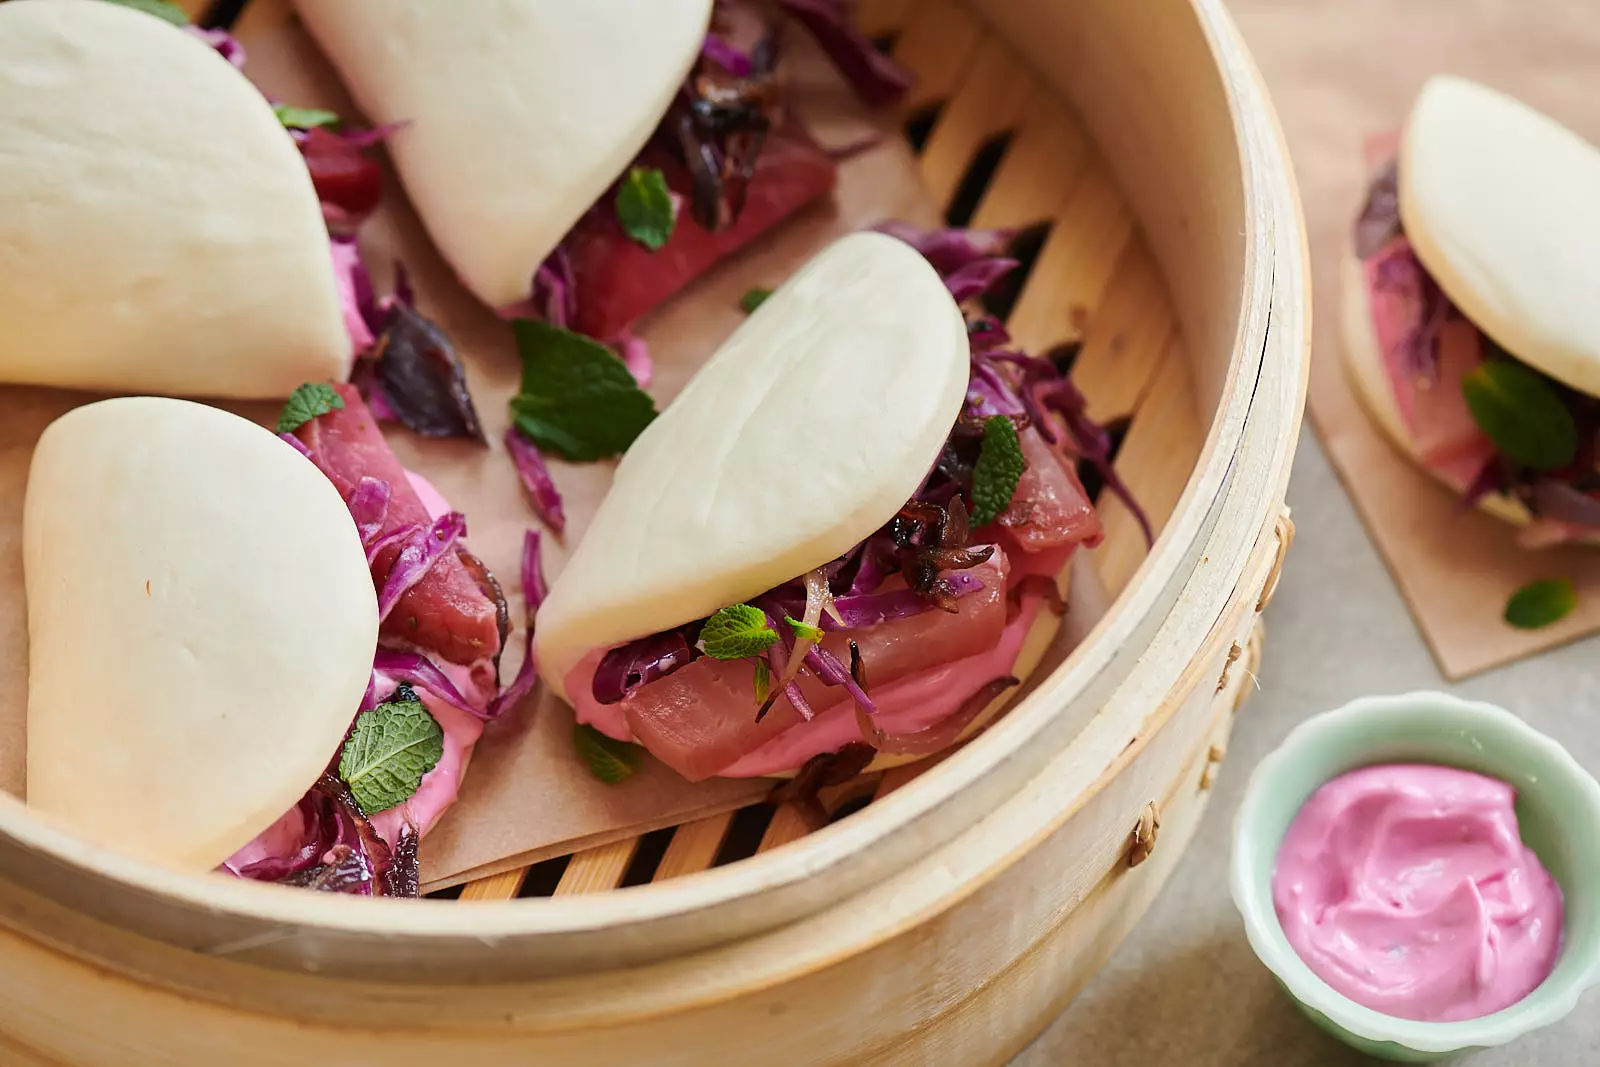 The on-trend millennial pink vegan mayo is infused with beetroot (